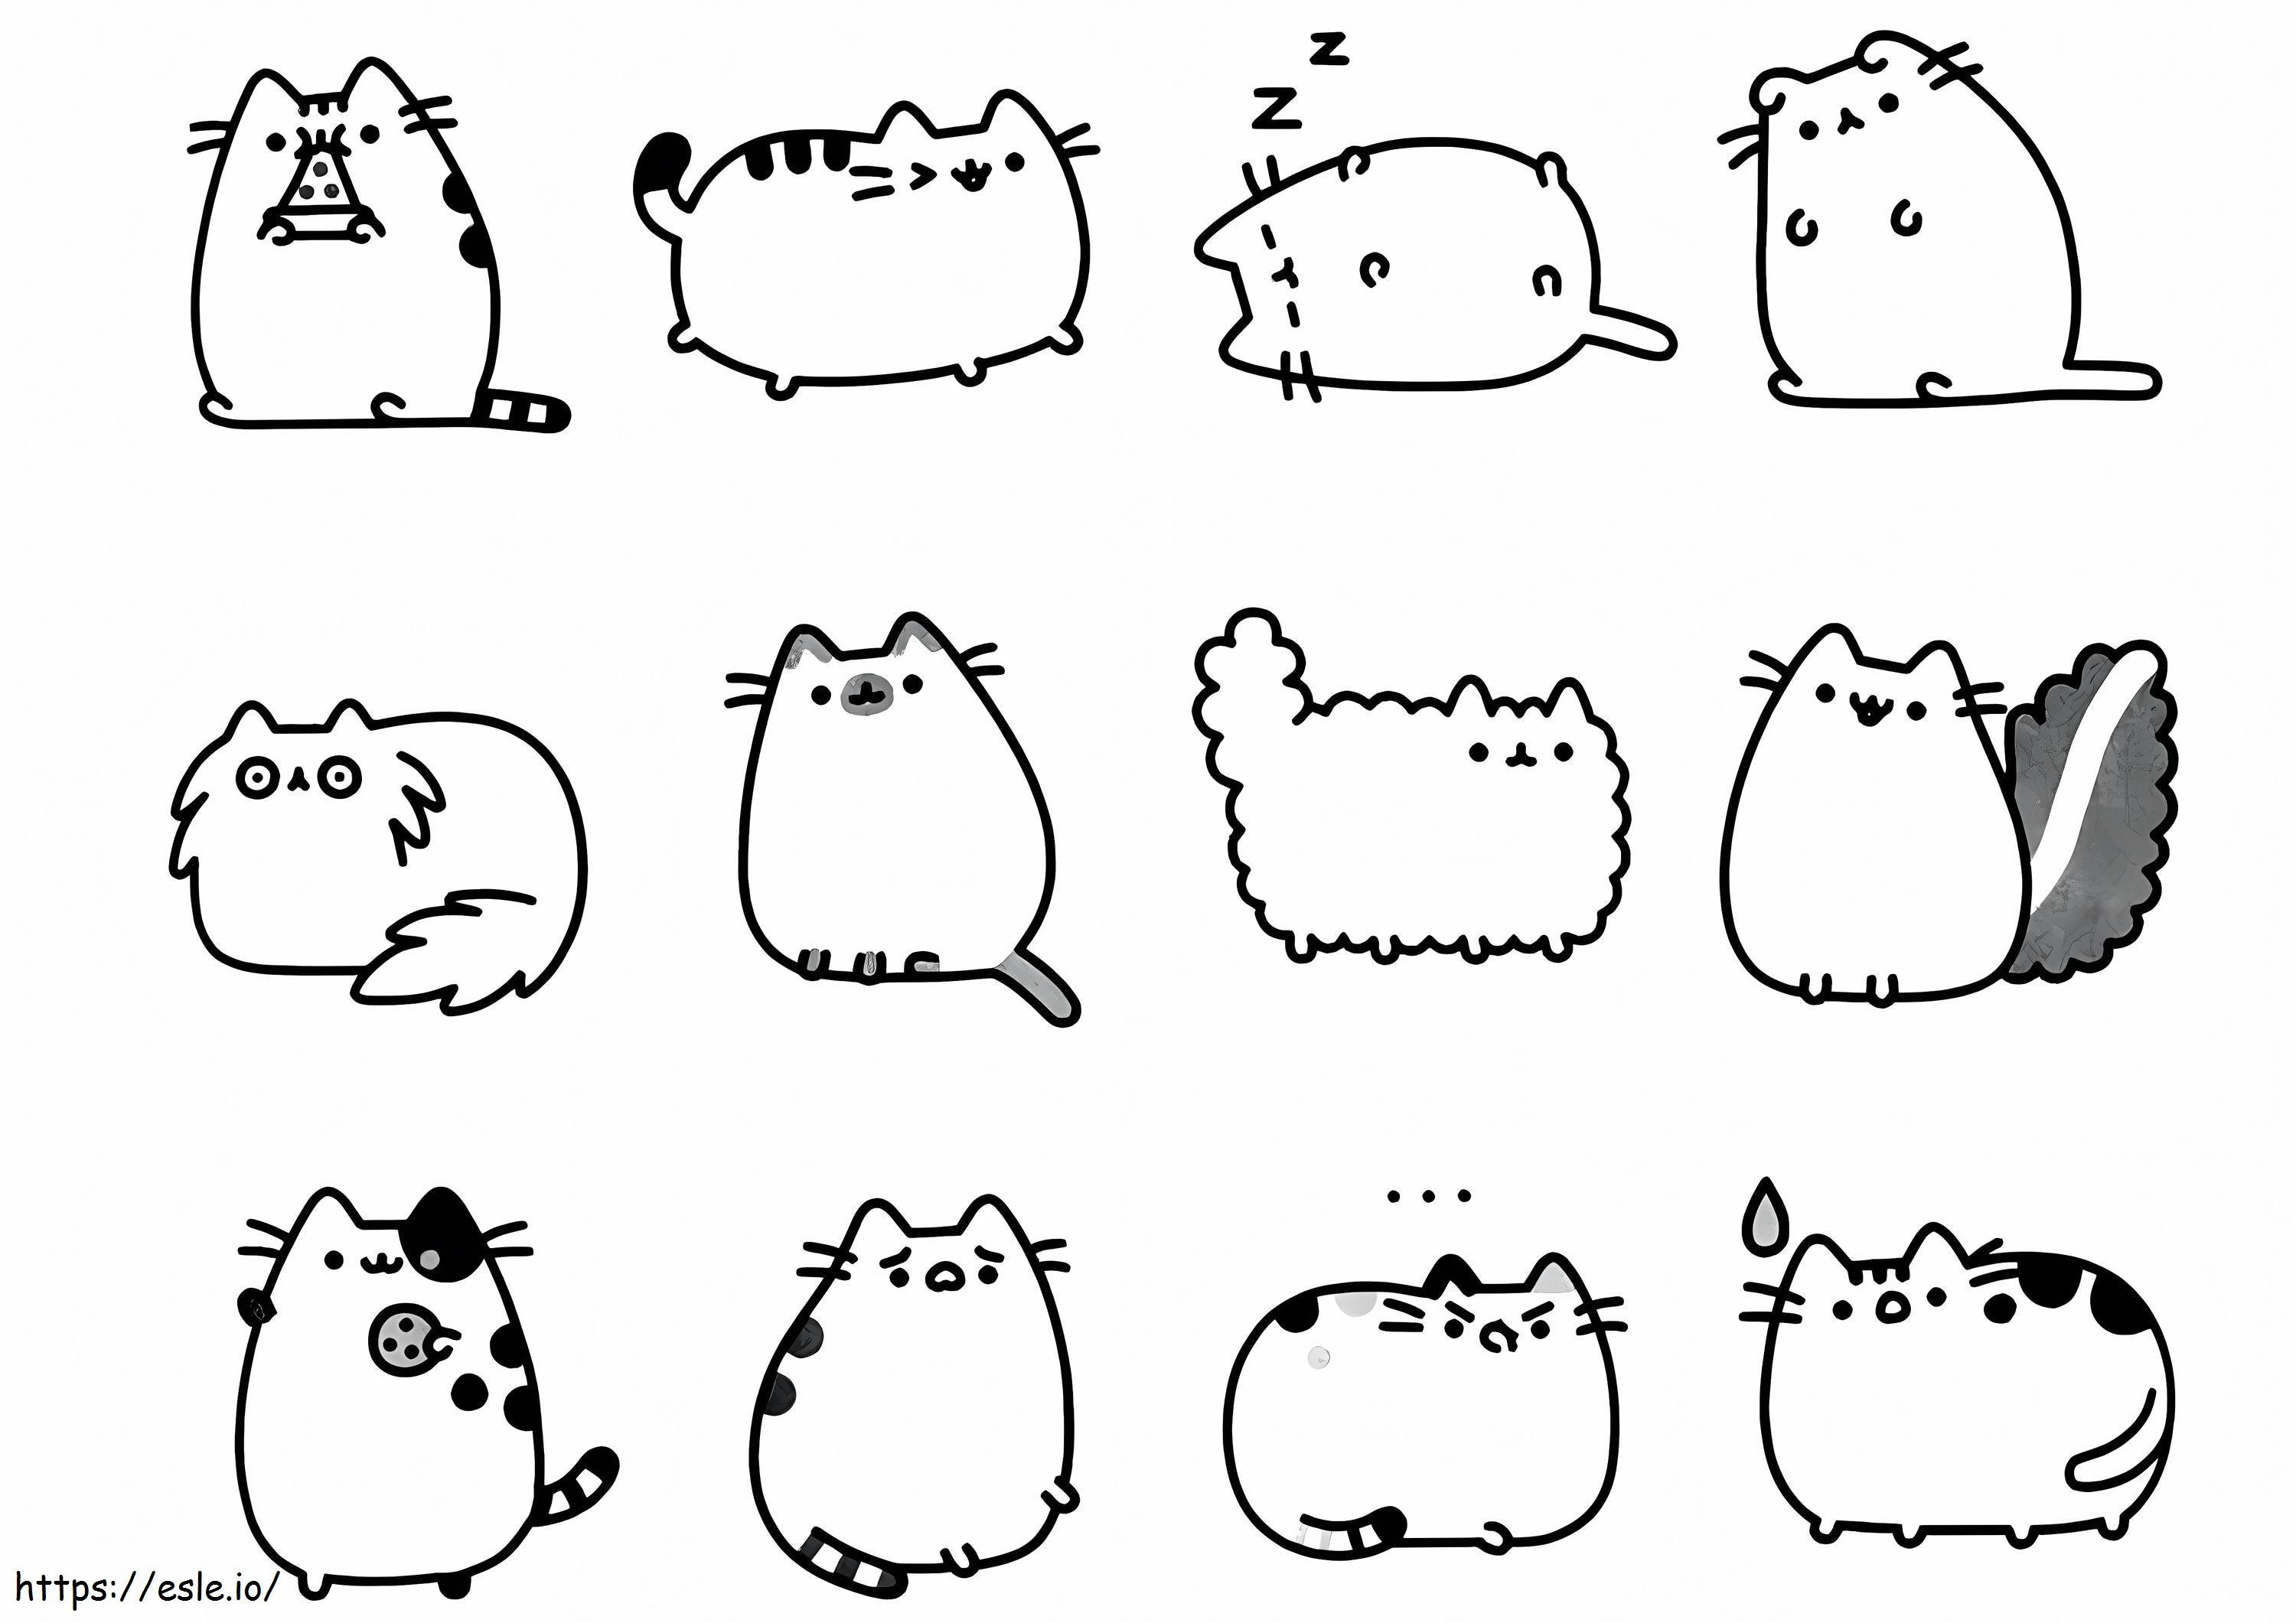 Pusheen Cats 1 coloring page